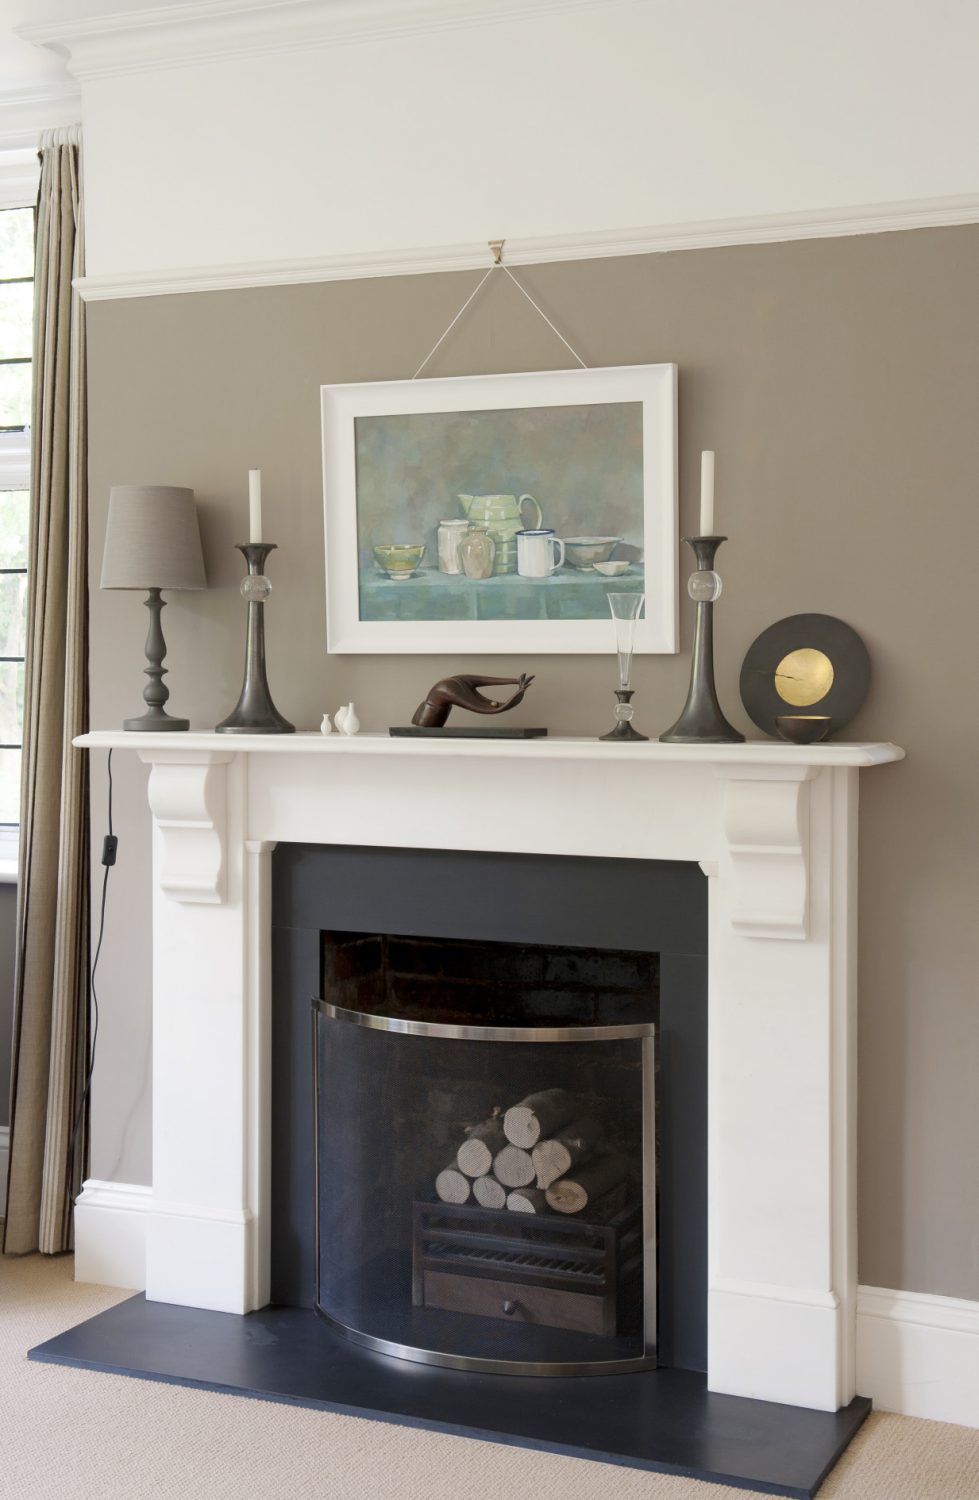 The fireplace is surrounded by neutral, restful tones